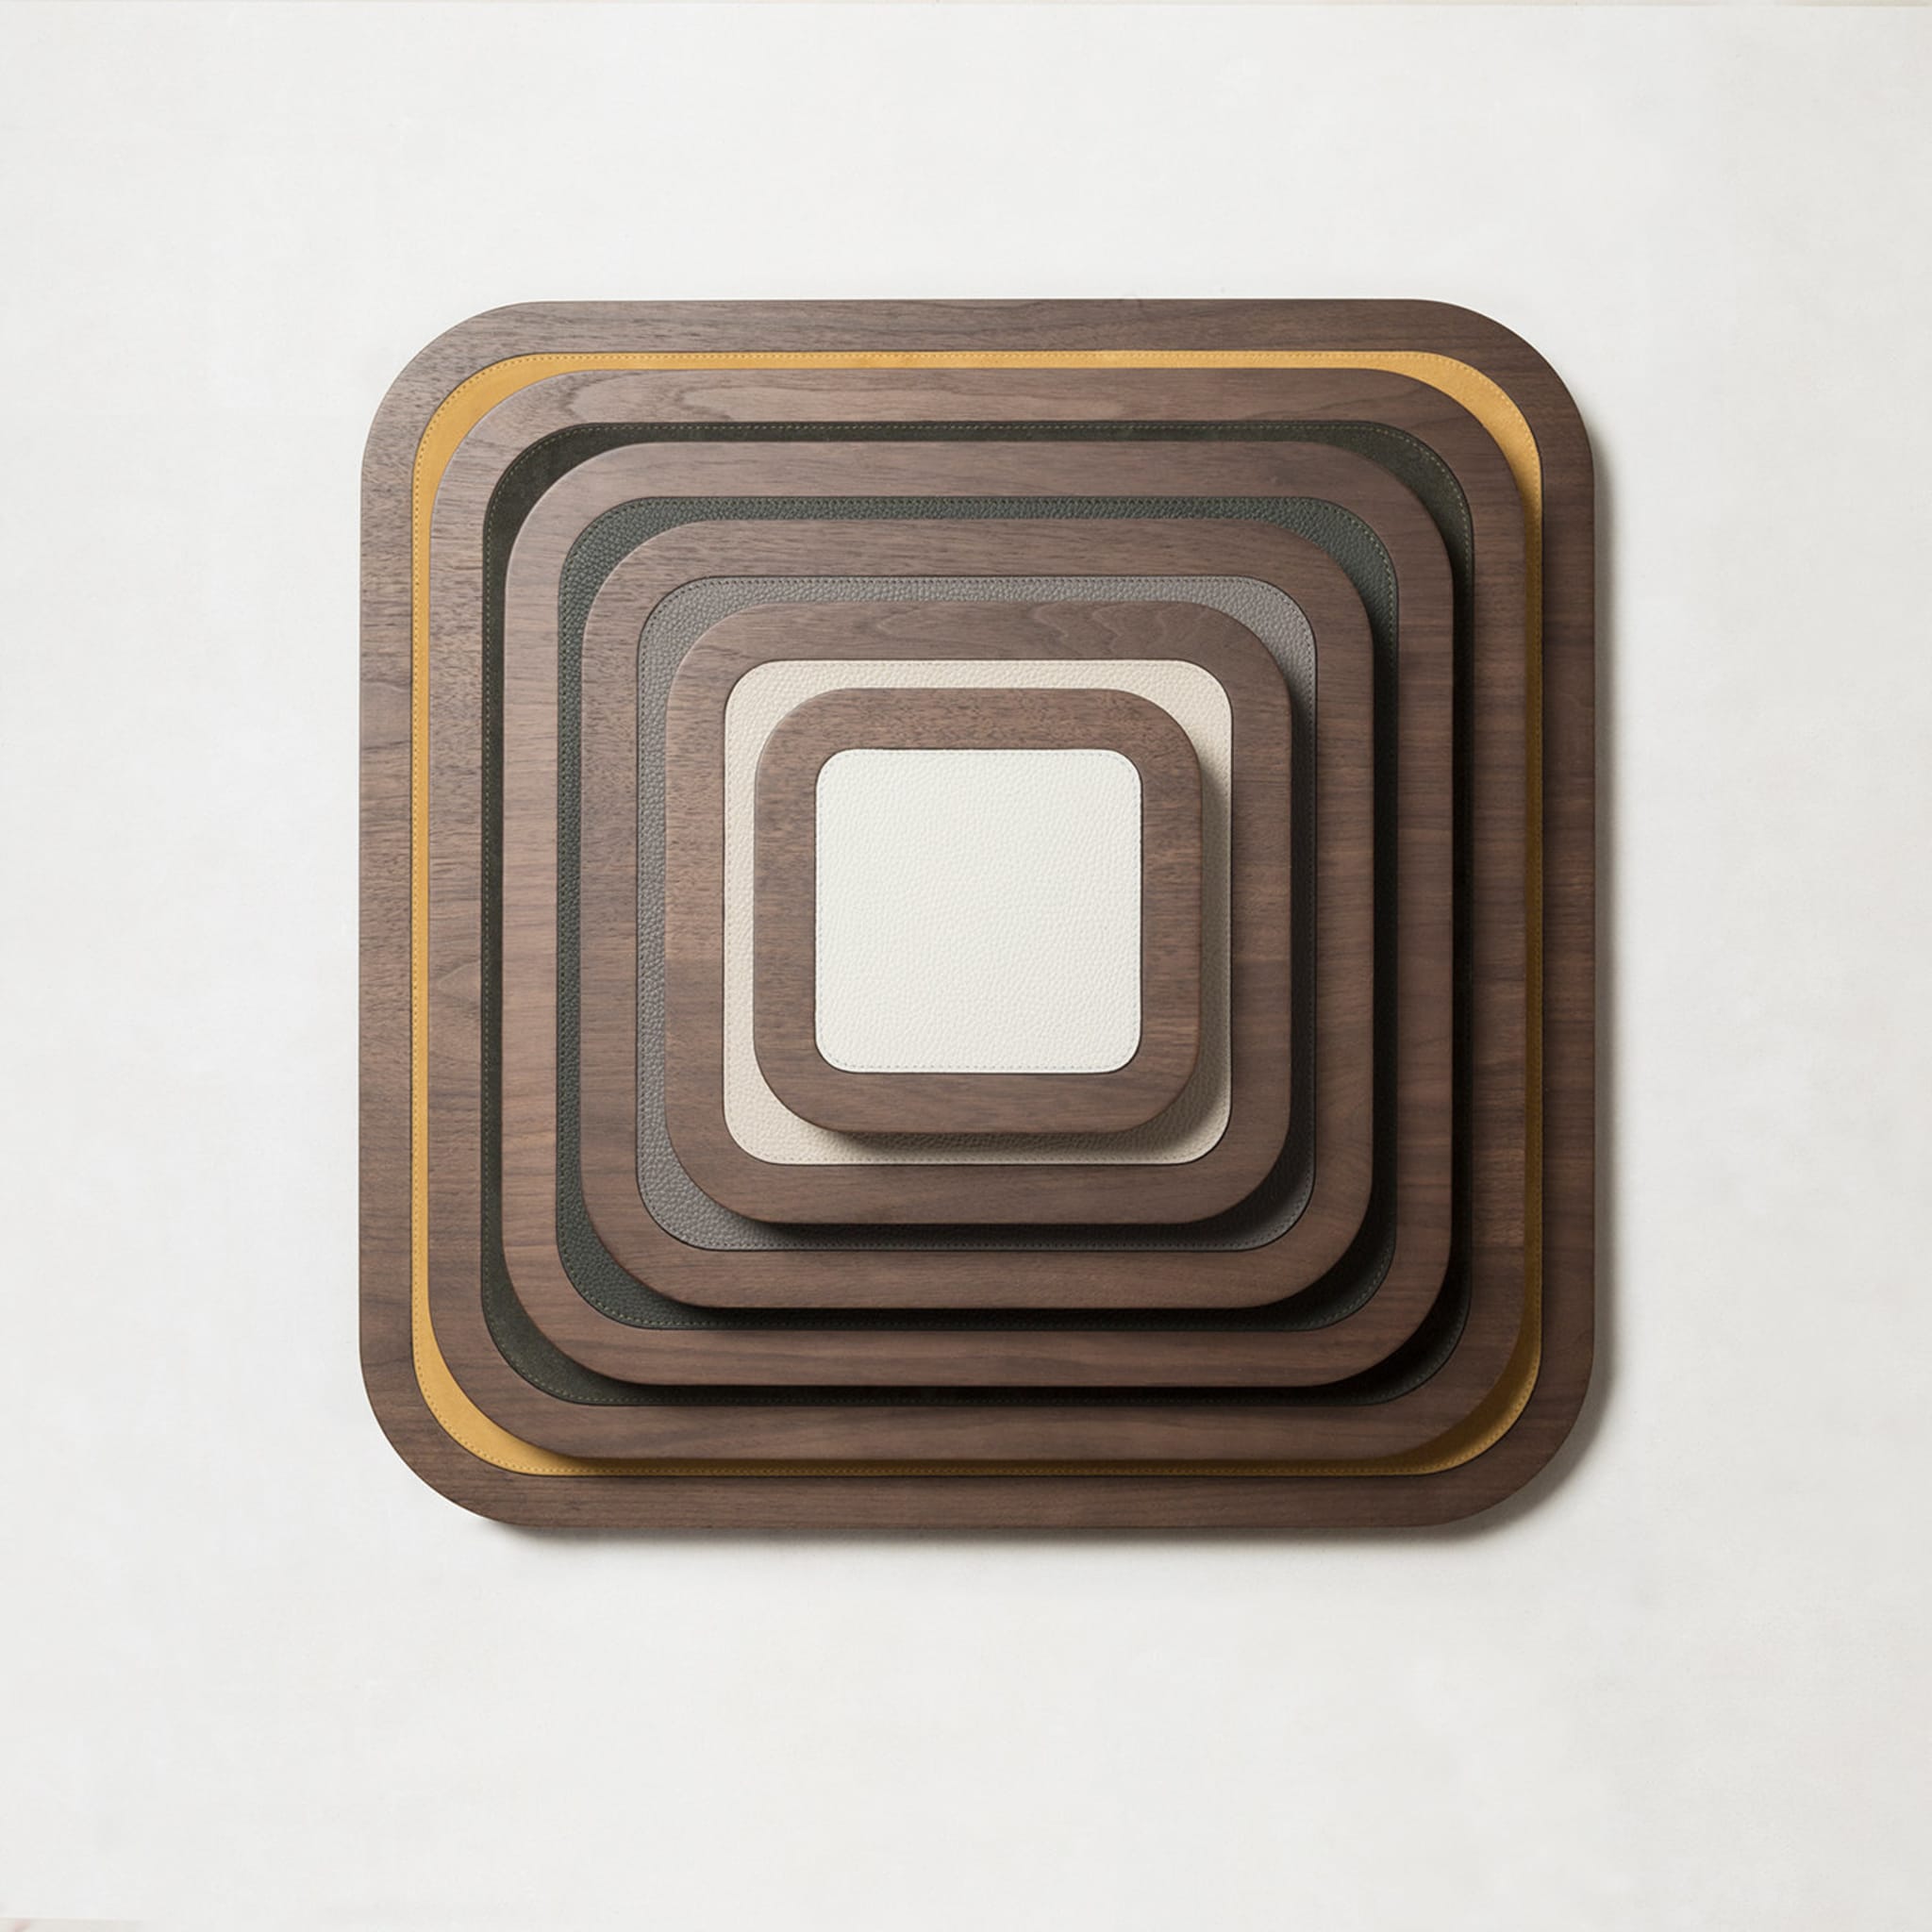 Lloyd Square Tray N. 1 in White and Walnut - Alternative view 2